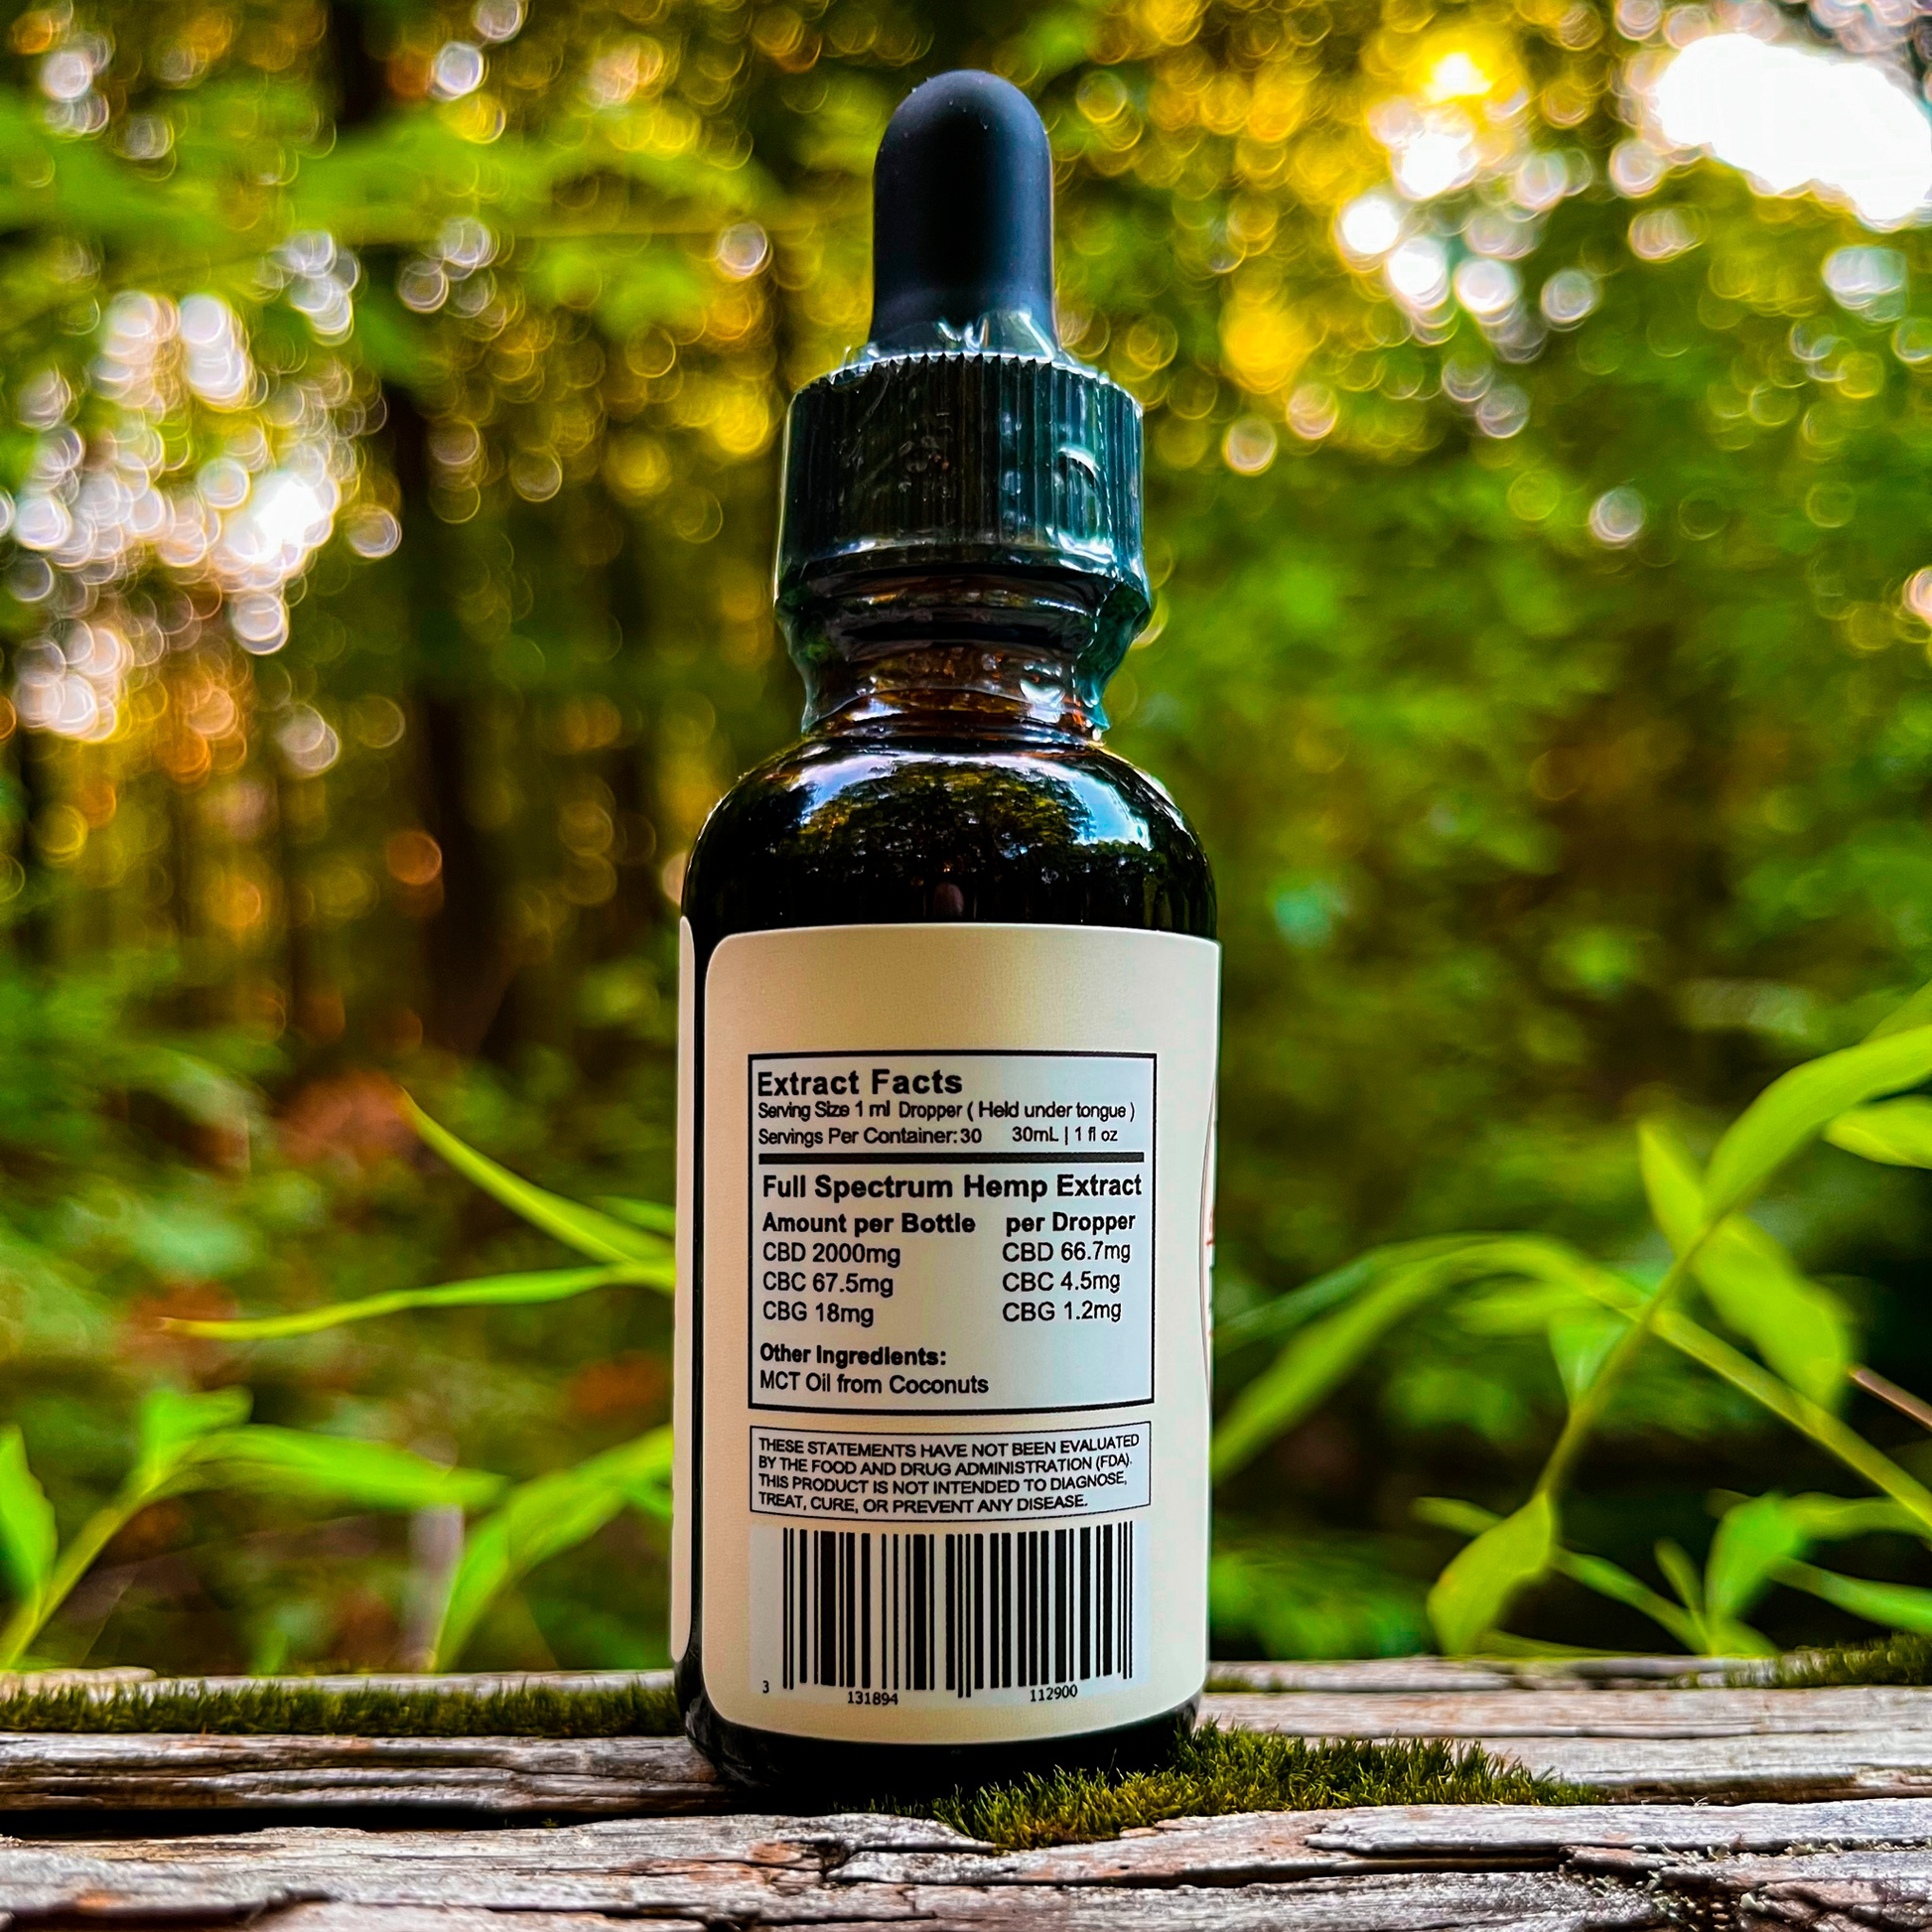 An image of a small bottle labeled Dark Earth Farms Full Spectrum Hemp Extract, featuring a green and yellow label with the brand name and product information. The bottle contains 2000mg of CBD oil with terpenes and cannabinoids, specifically designed to help alleviate pain, anxiety, and improve sleep. The bottle is placed on a wooden surface, surrounded by leaves and a small dropper next to it, ready for use.